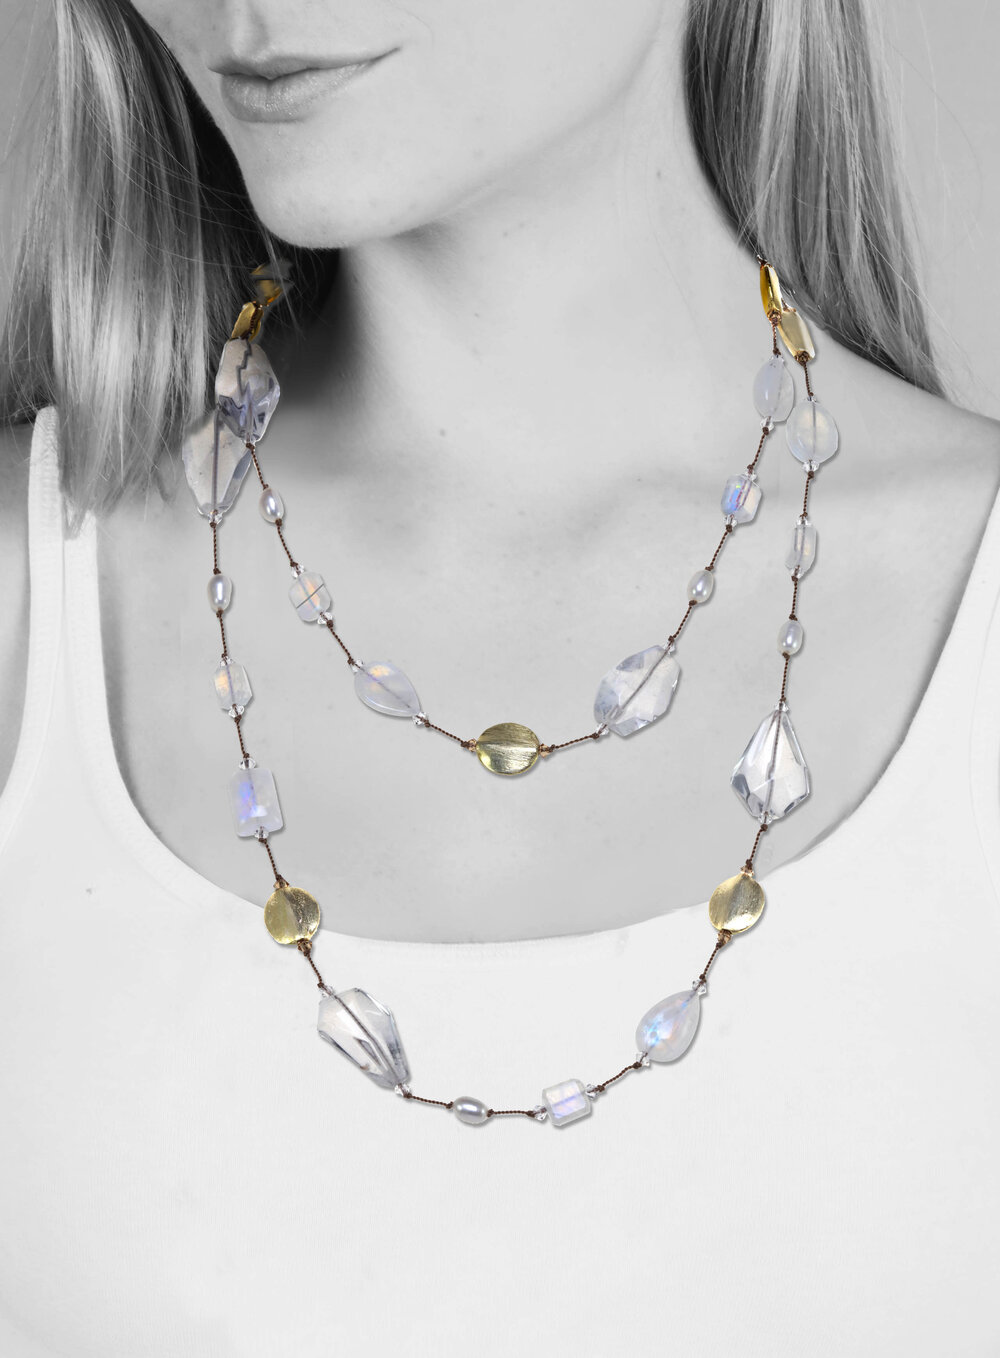 Urban Outfitters Margot Delicate Pearl Layering Necklace in Silver, Women's at Urban Outfitters